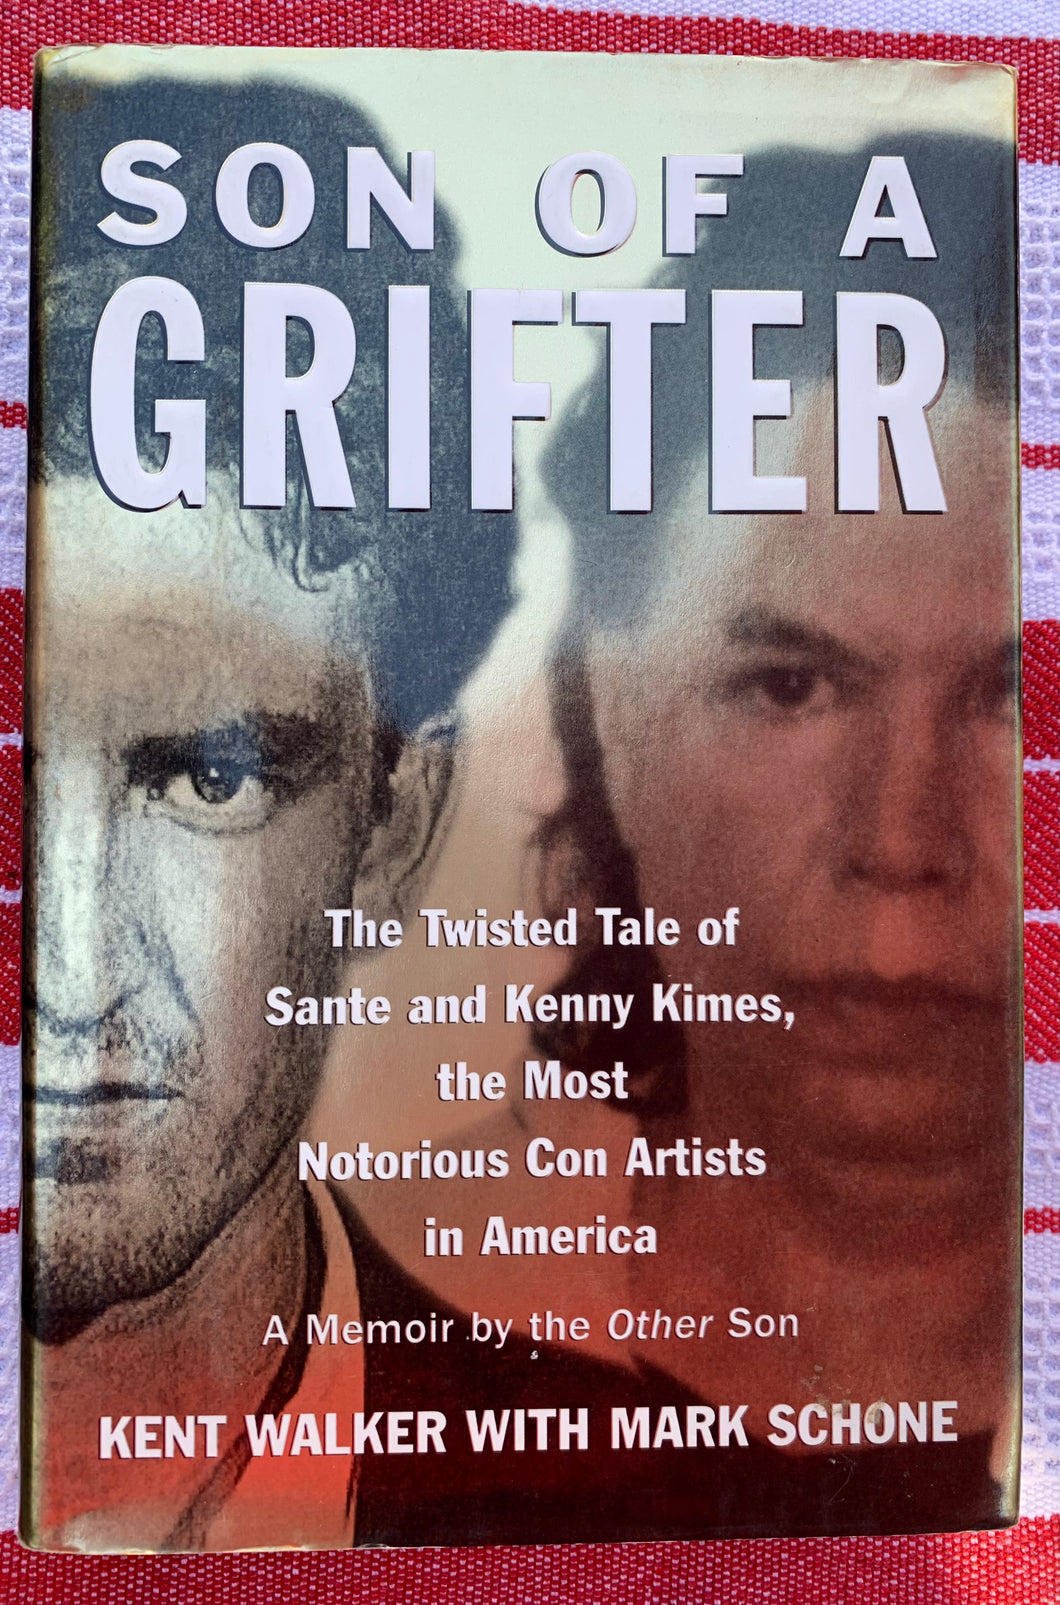 Son of a Grifter: The Twisted Tale of Sante and Kenny Kimes, the Most Notorious Con Artists in America